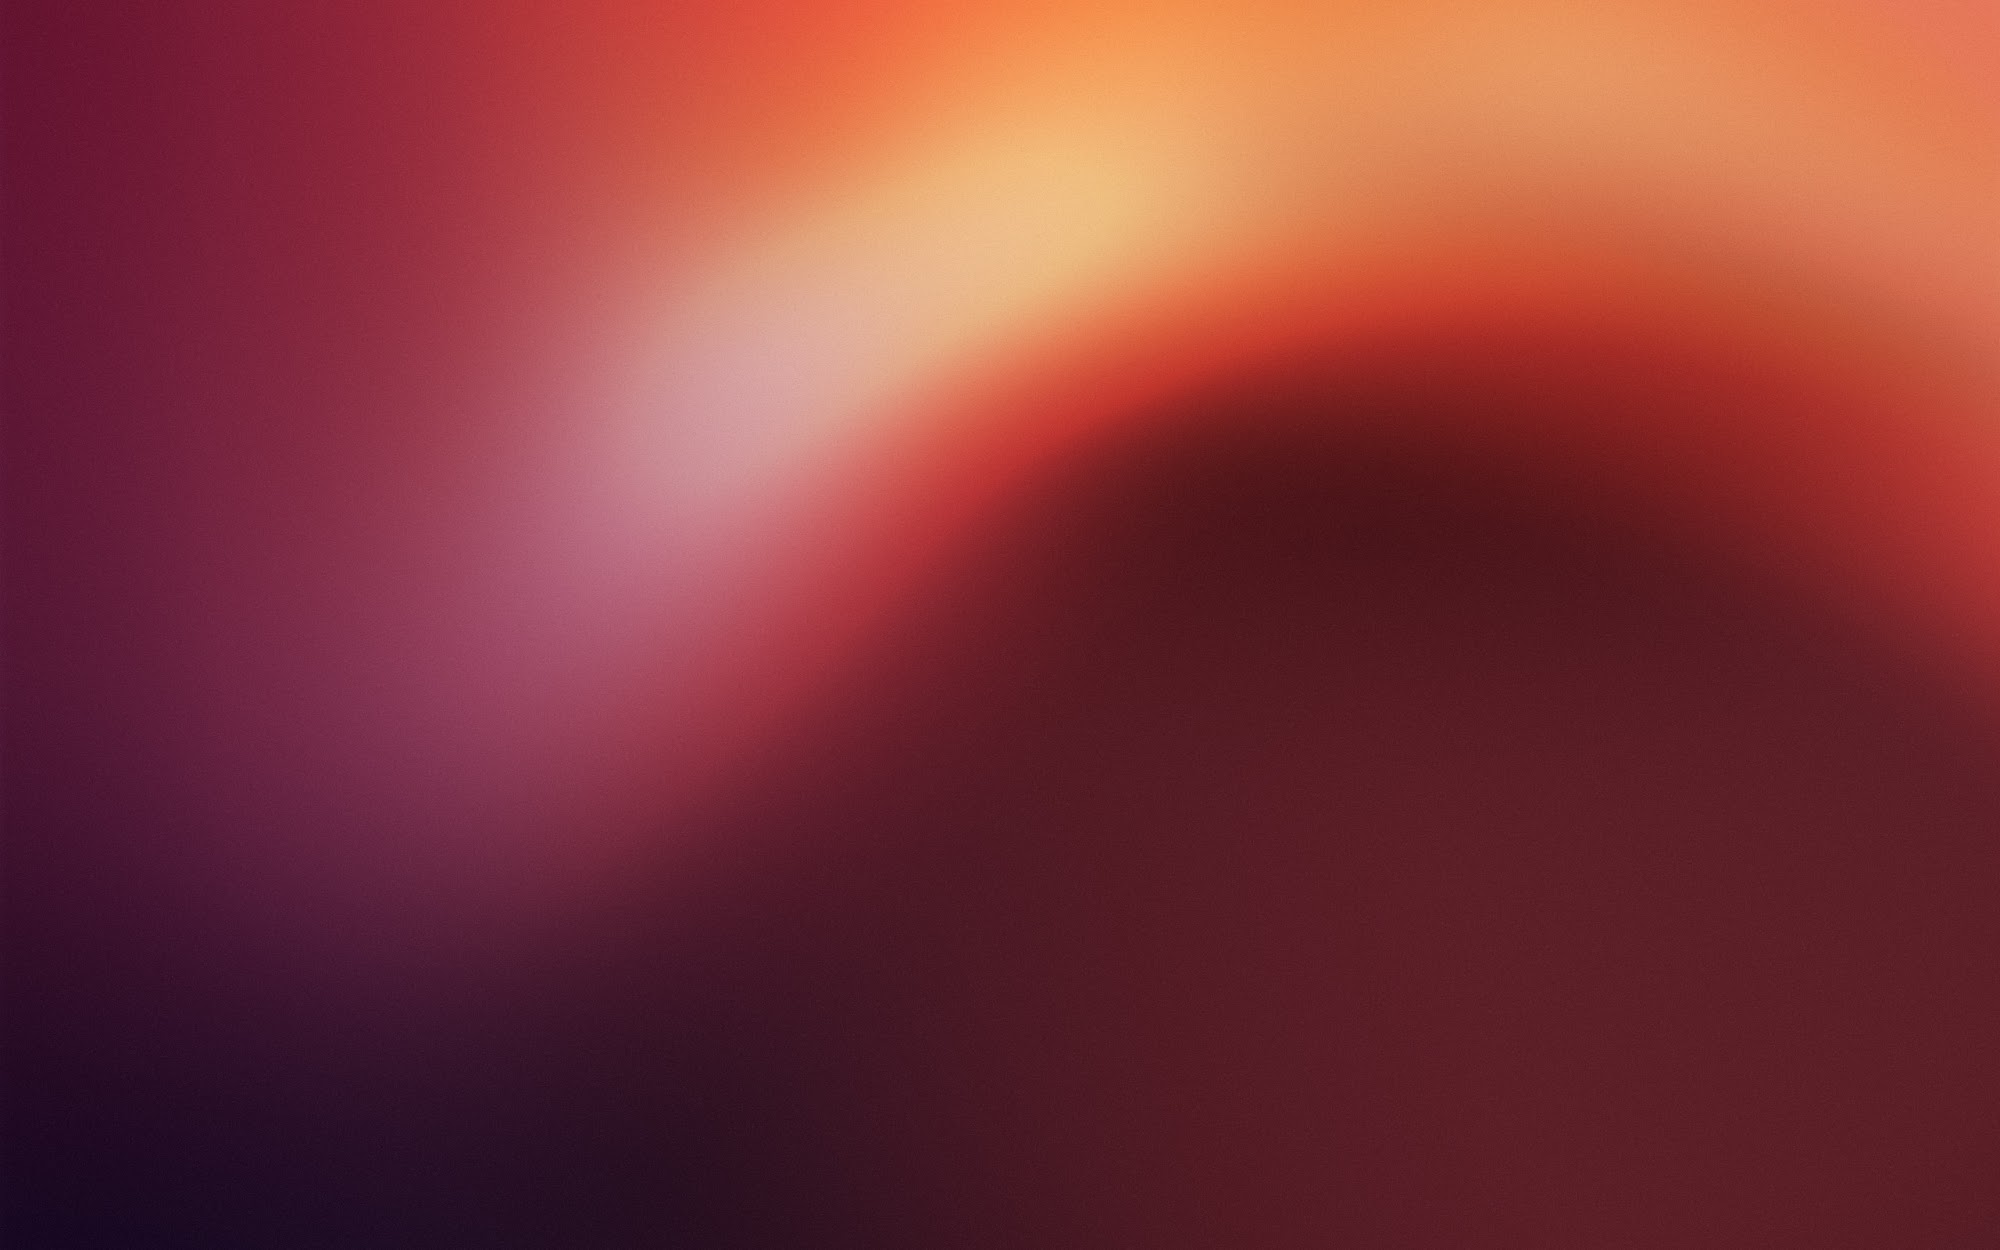  can download the full size Ubuntu 1210 default wallpaper from HERE 2000x1250